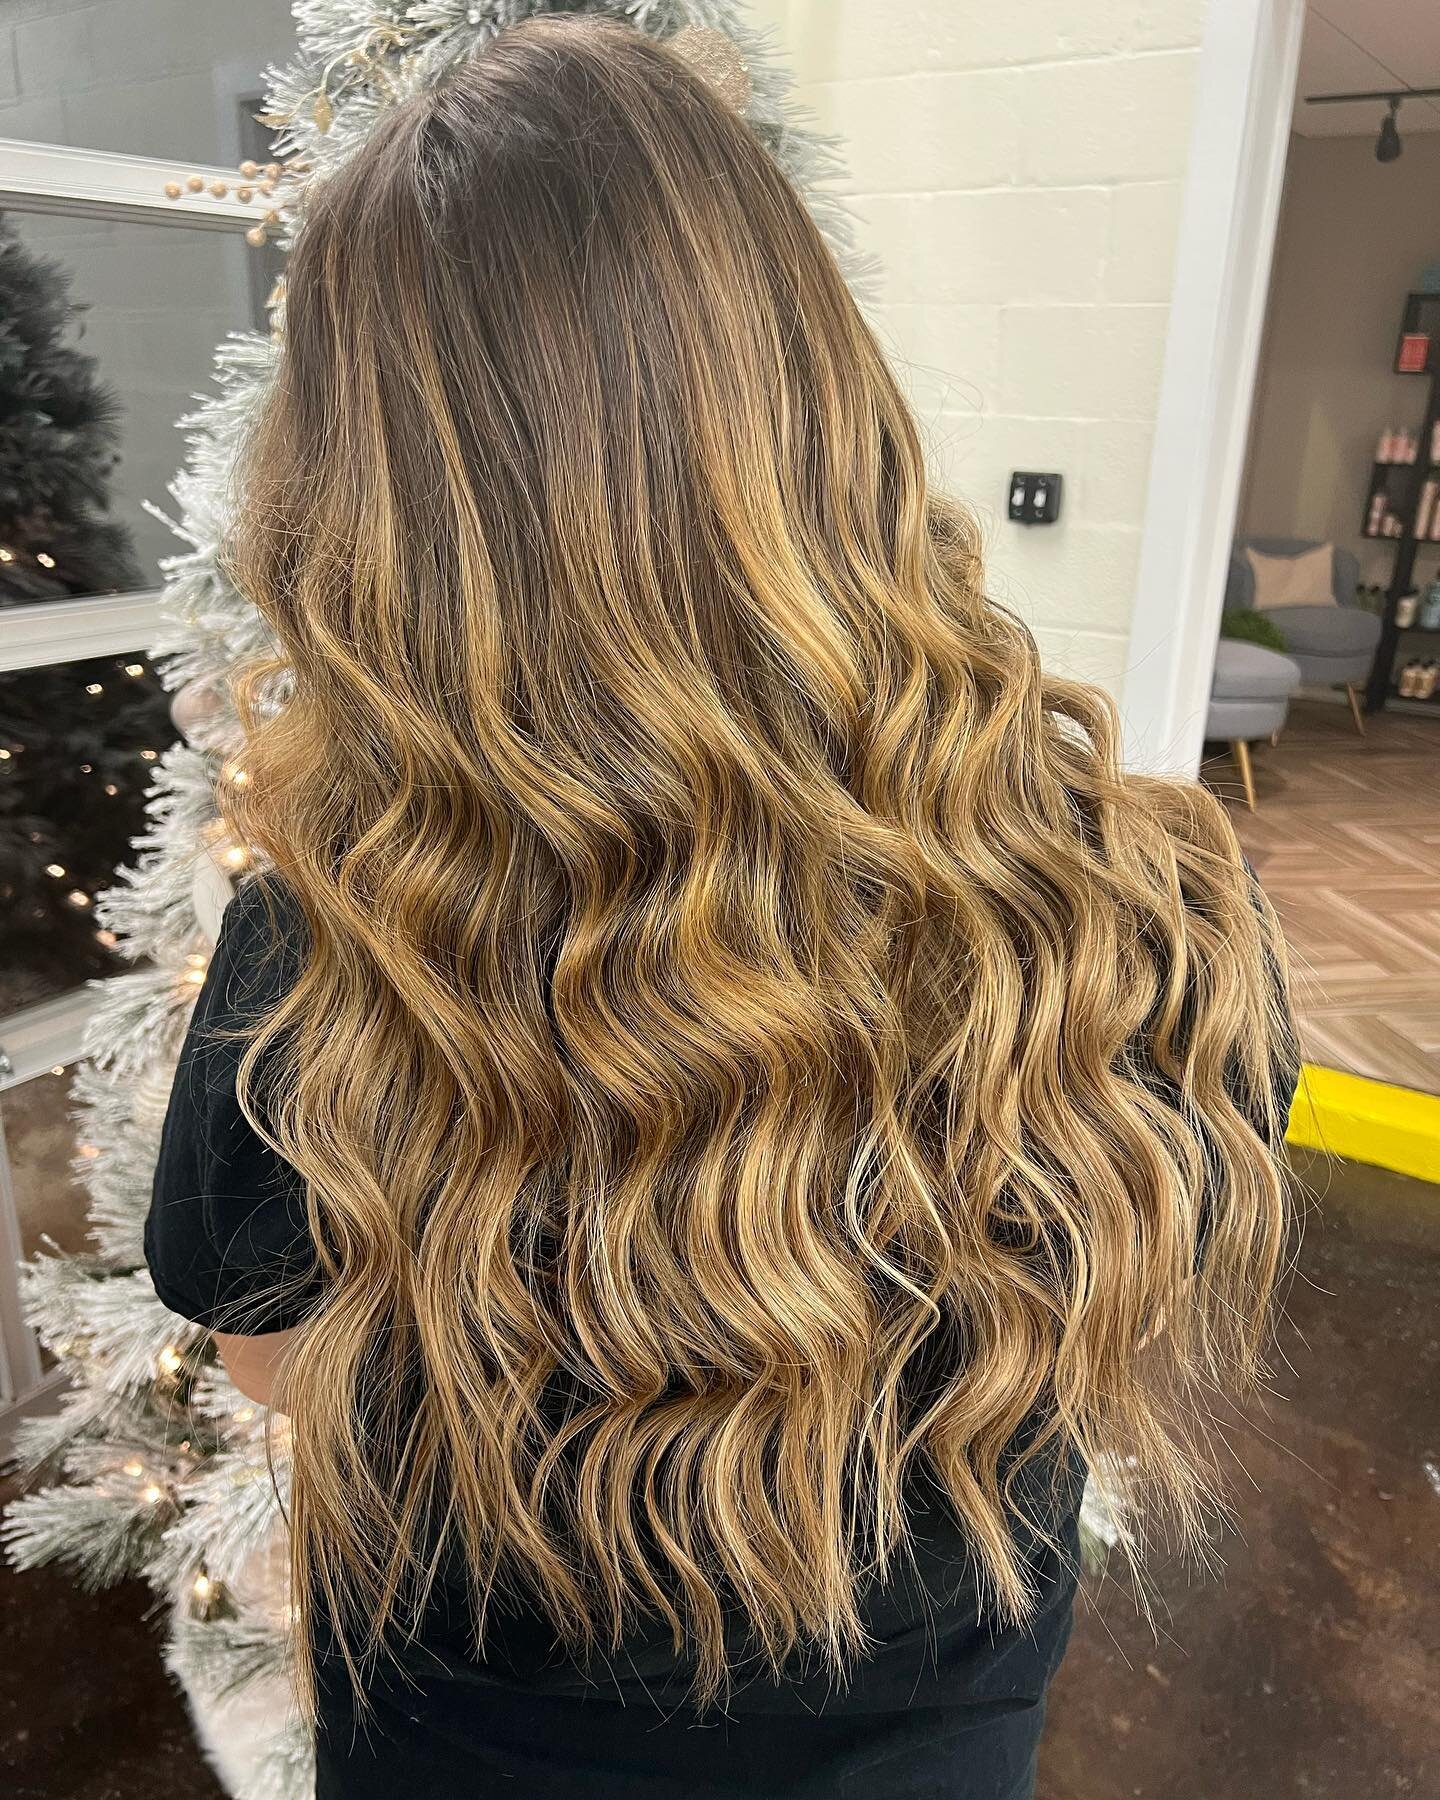 What a transformation!! 😍🤤
Swipe ⏩⏩ for before 

18&rdquo; beautiful balayaged install of  @halocoutureextensions by @hairbylarissa_h 

#tapeinextensions #balayage #extensions #halocoutureextensions #halocouture #hhouseofhair #18inches